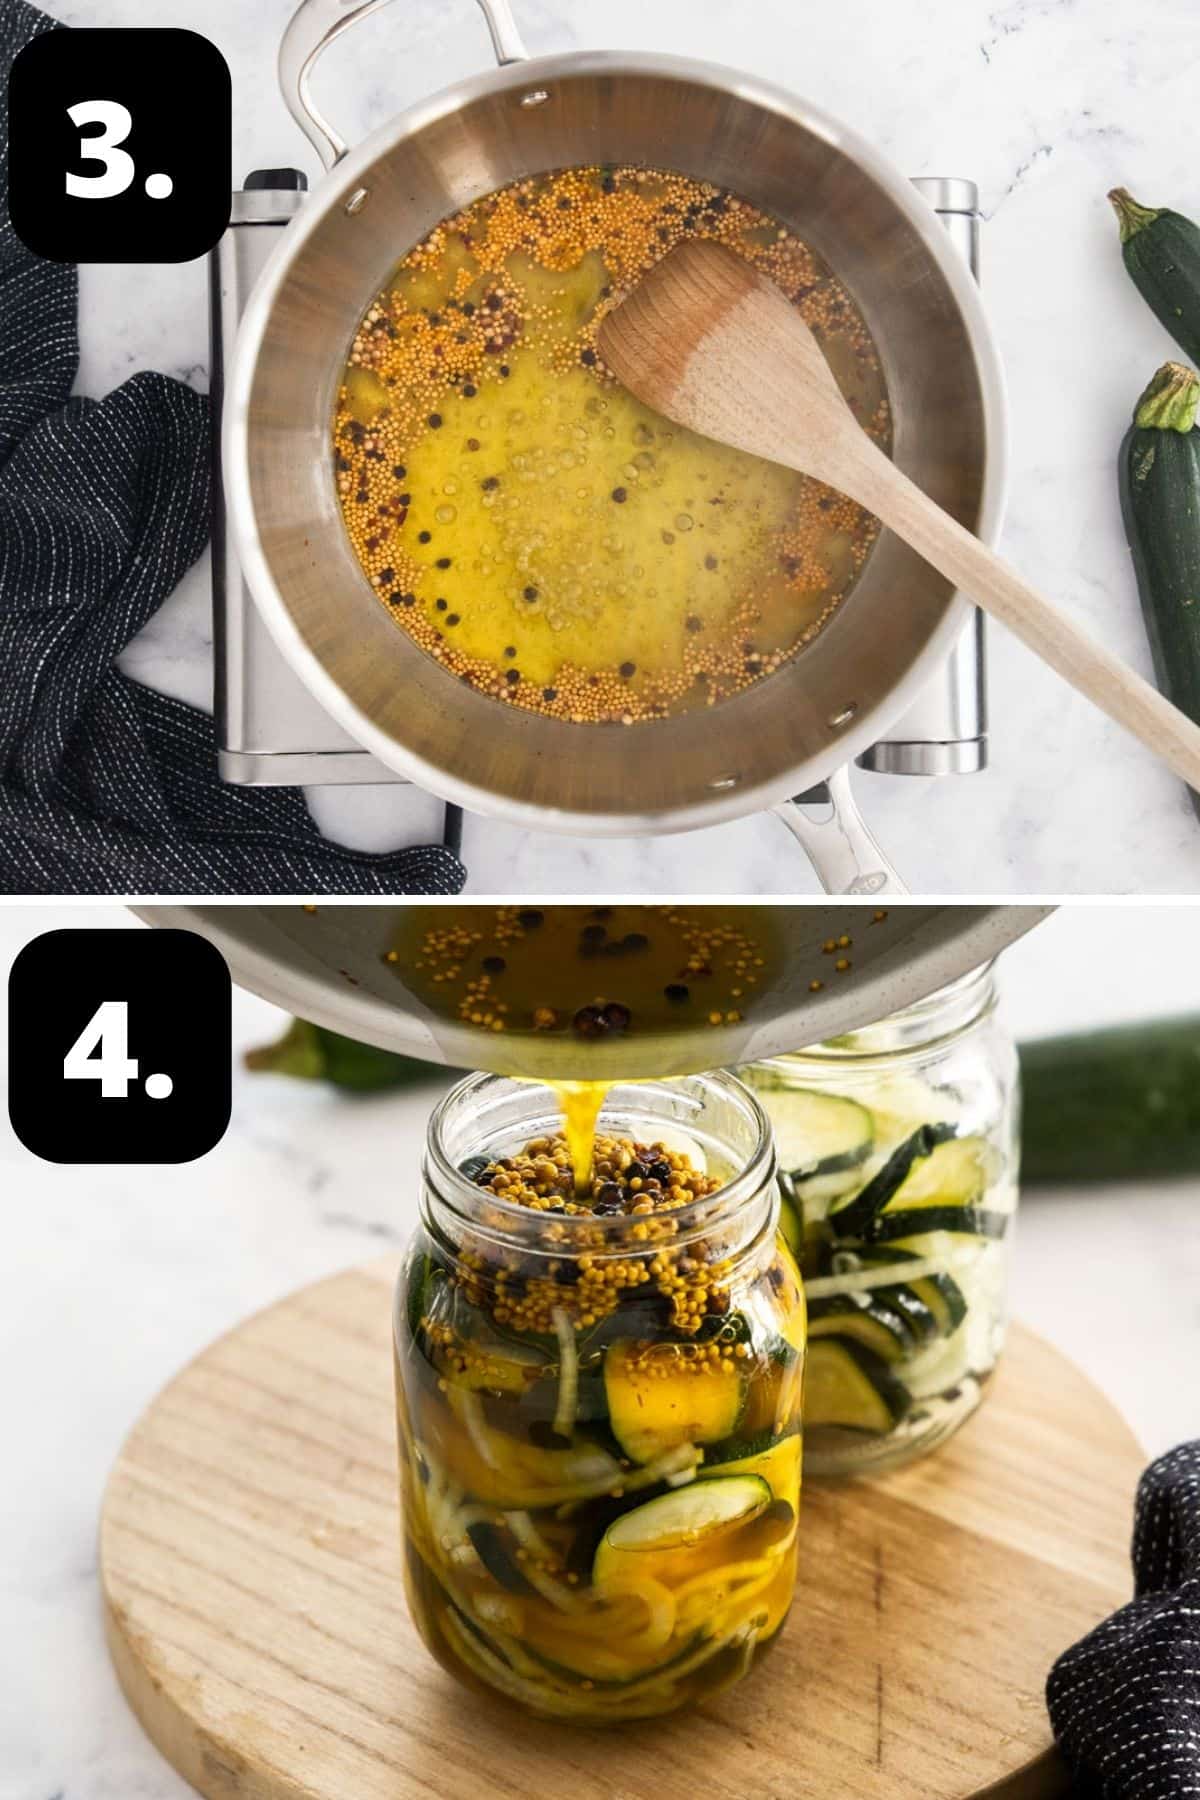 Steps 3-4 of preparing this recipe - preparing the pickling brine and pouring the brine into the jar with the zucchini.